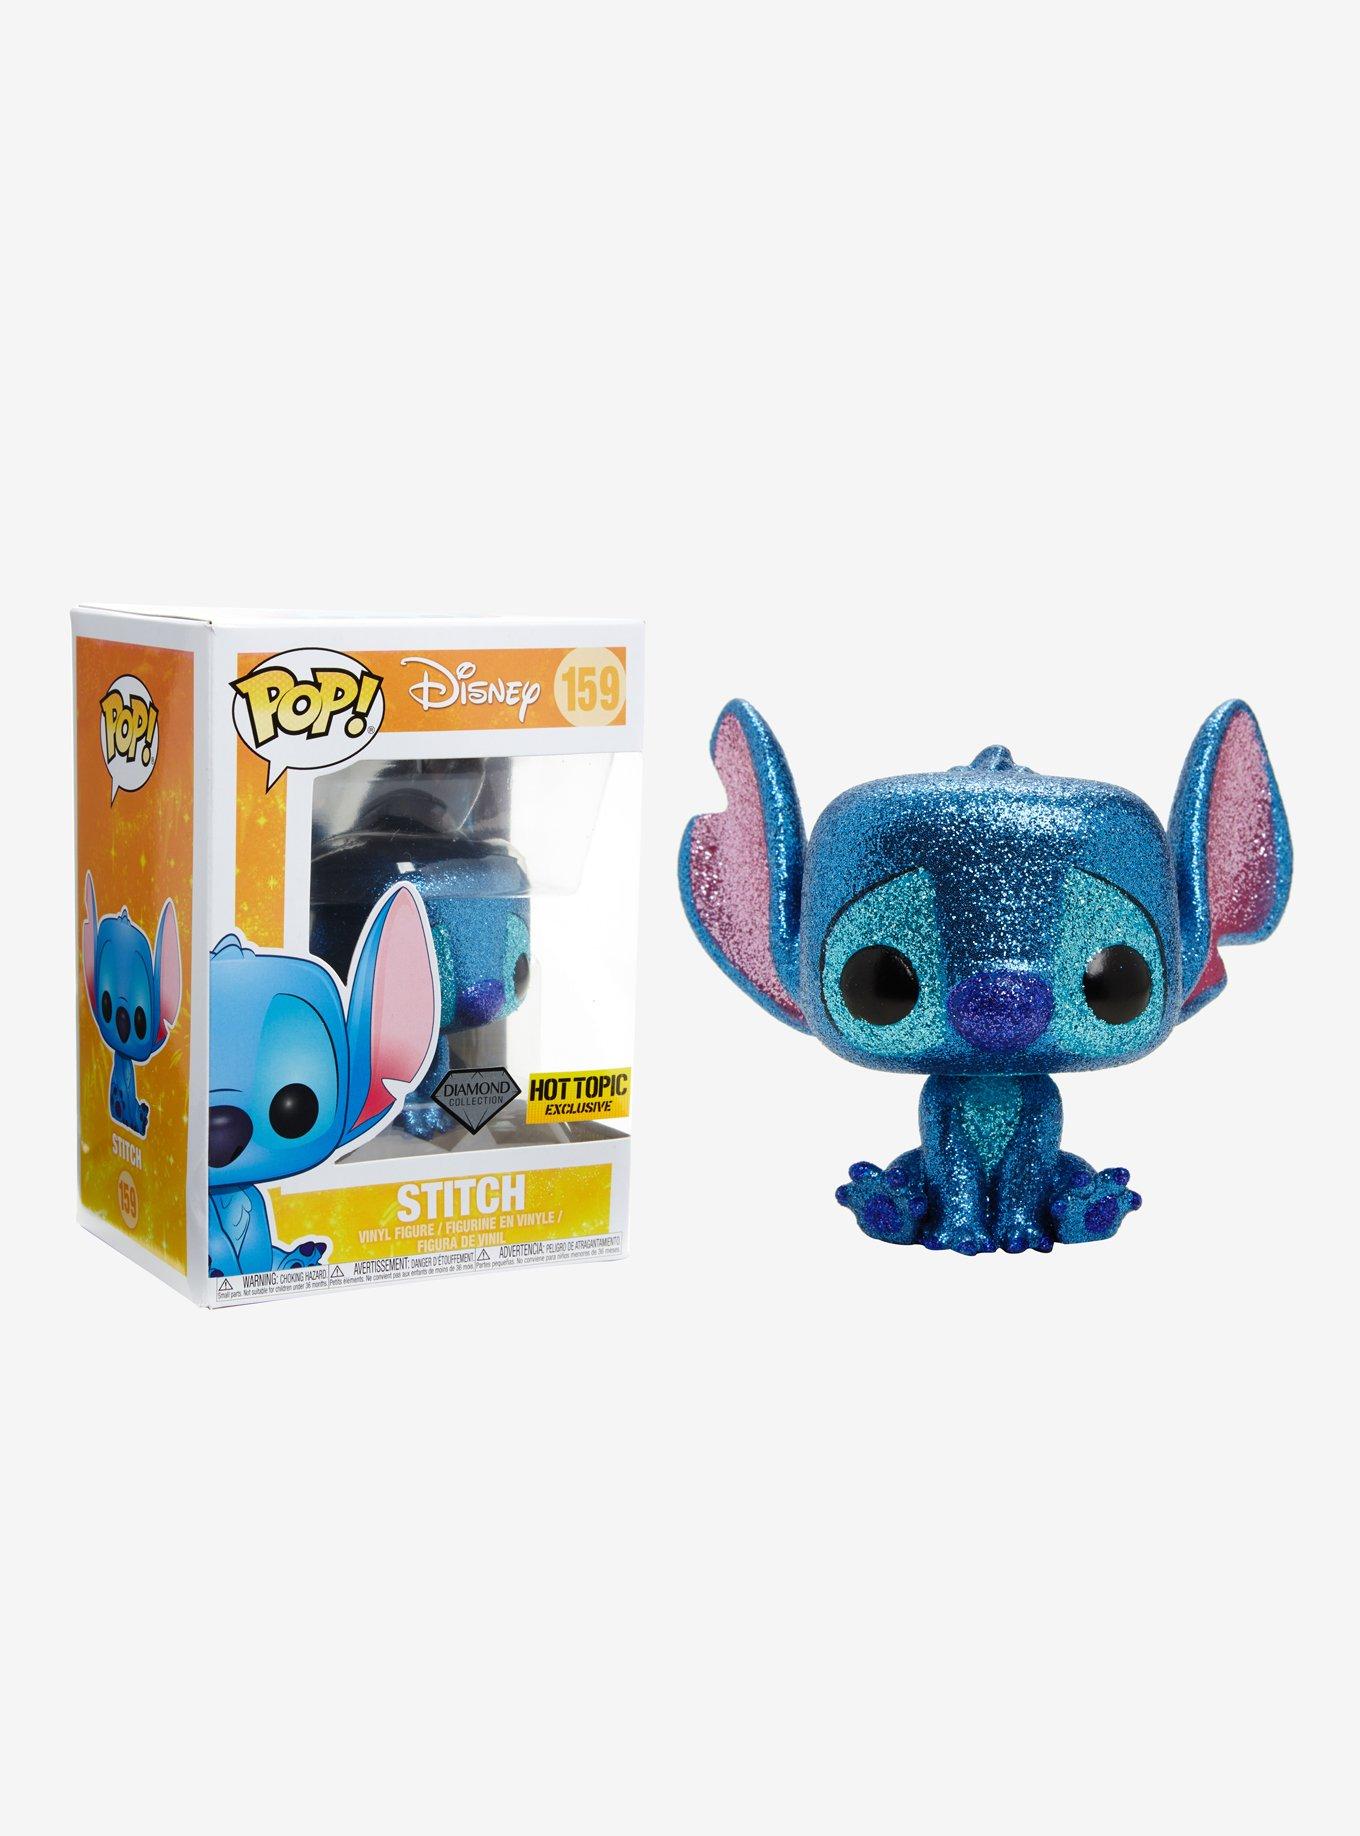 ALERT! Disney Dropped a Stitch Makeup Collection on !